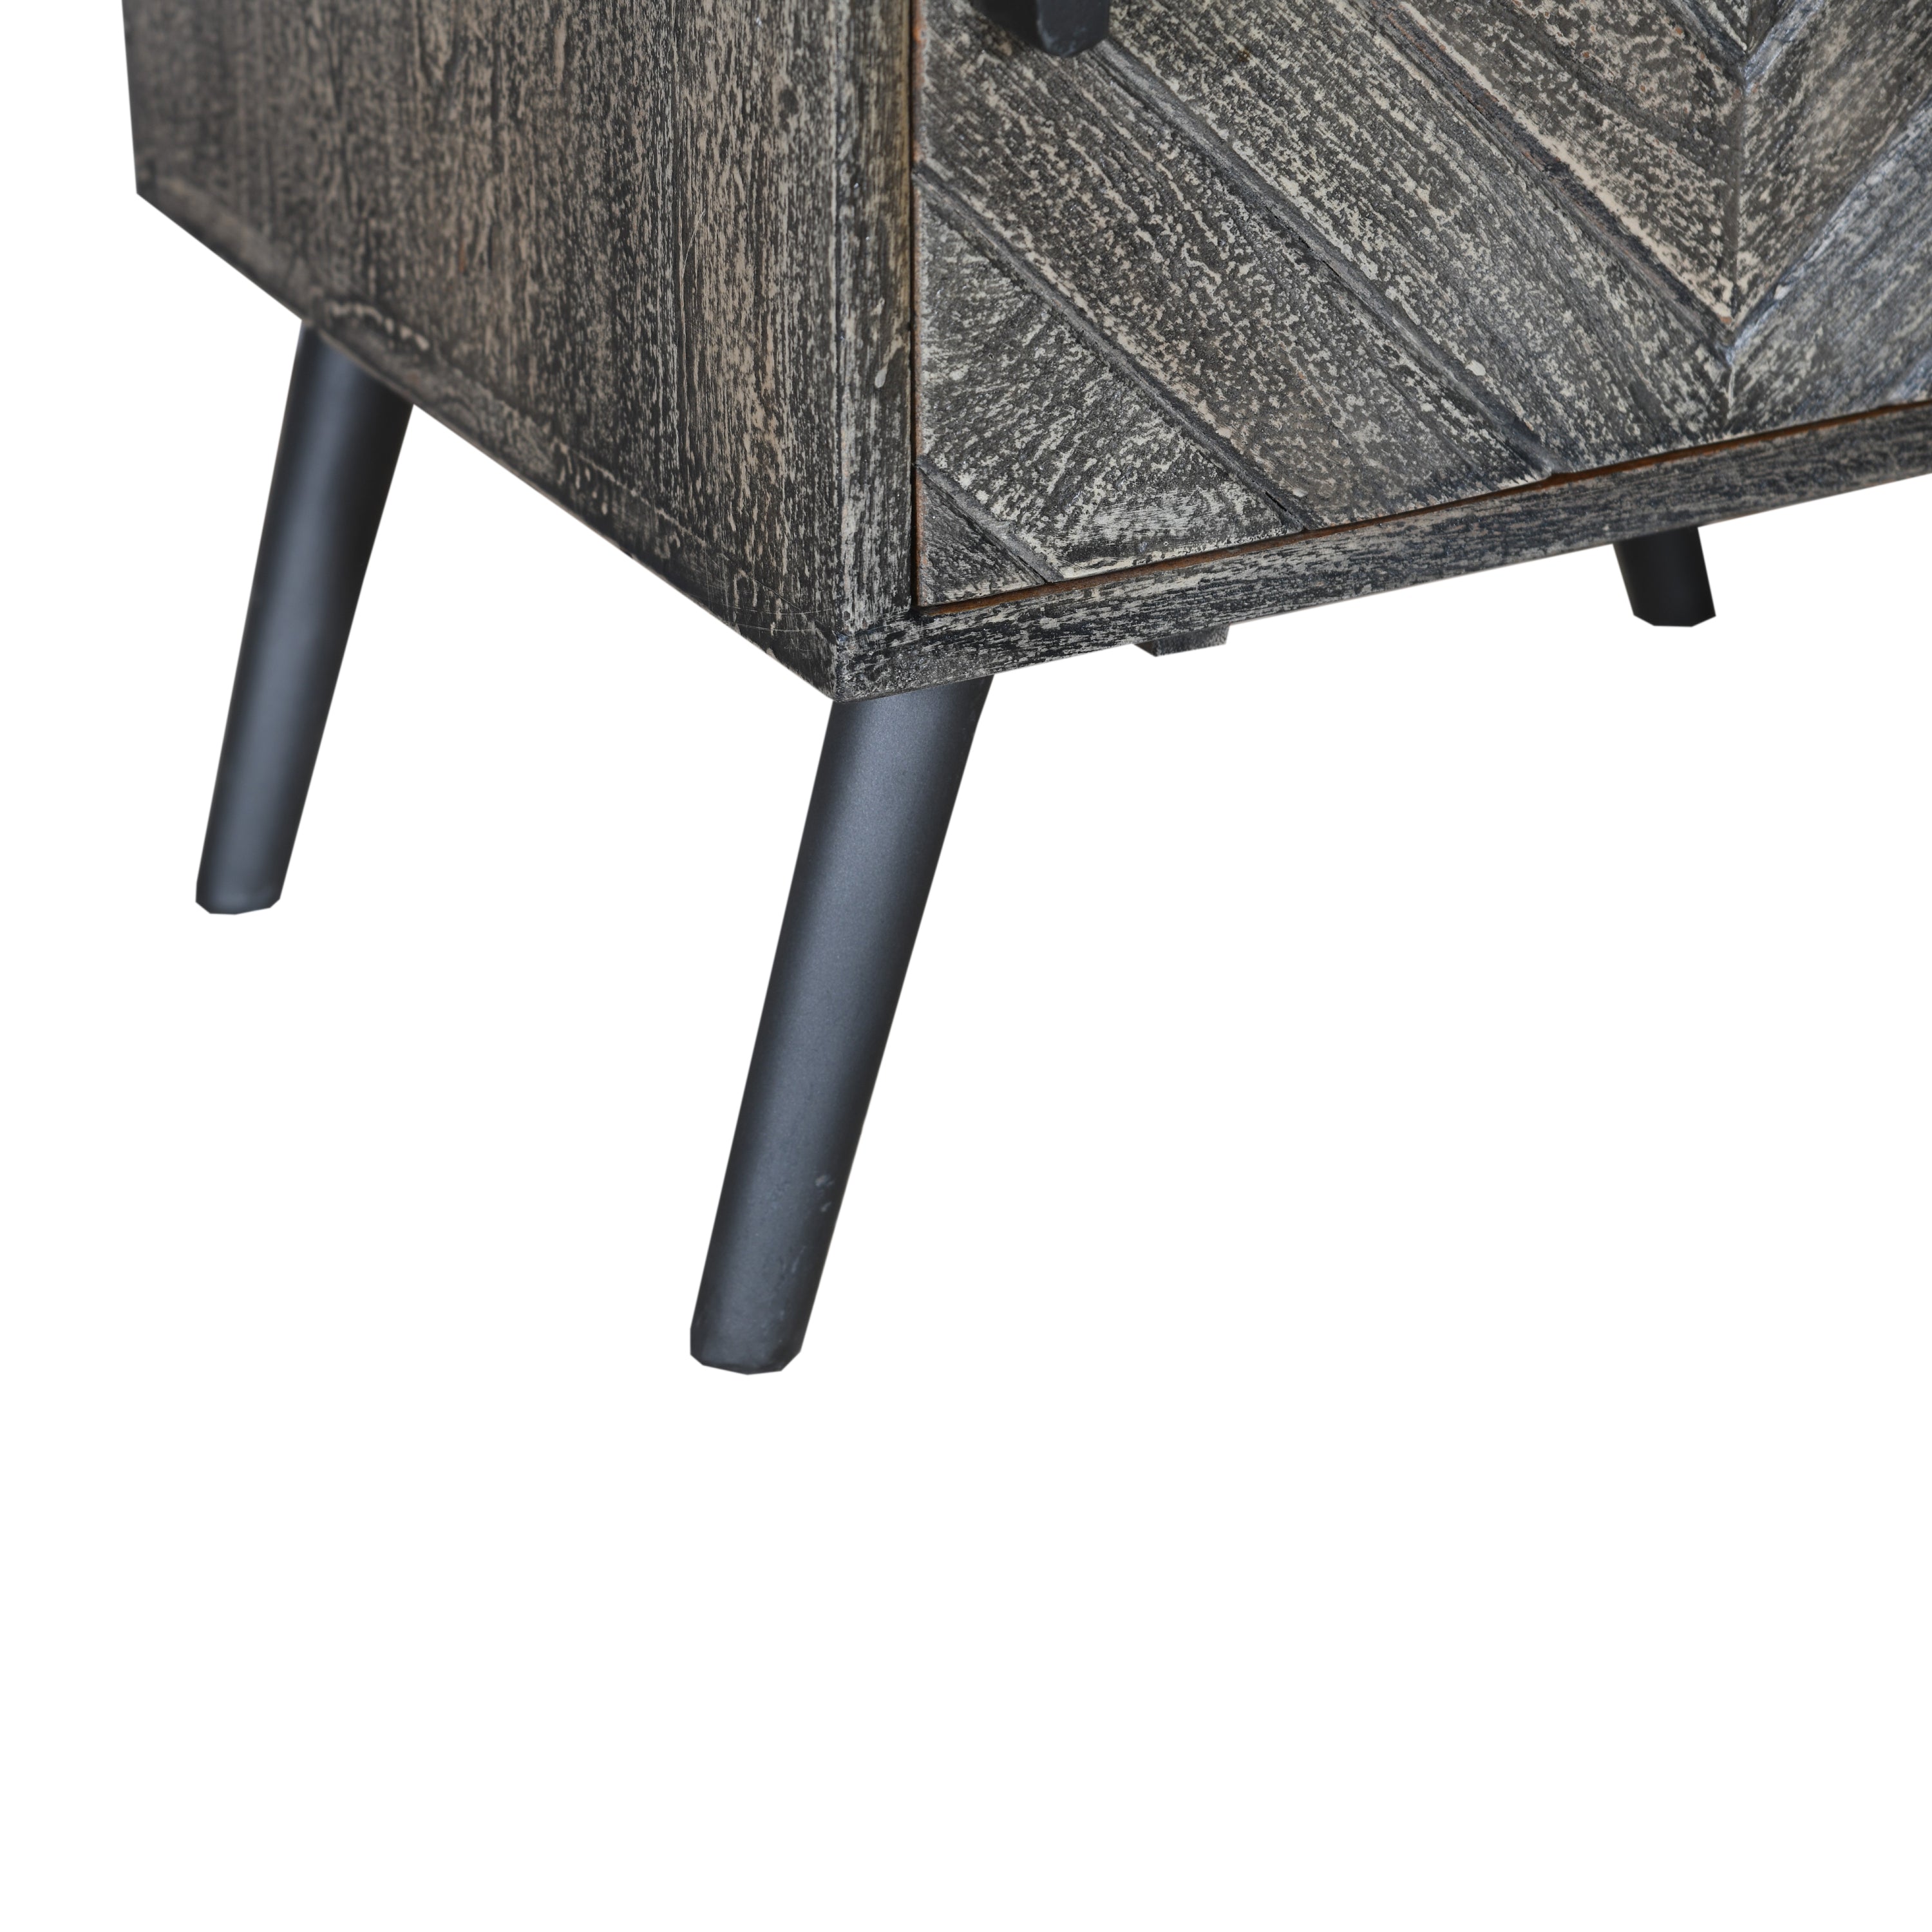 MAICOSY 26" Chevron Pattern Wood Bedside Nightstand, Distressed Gray End Table